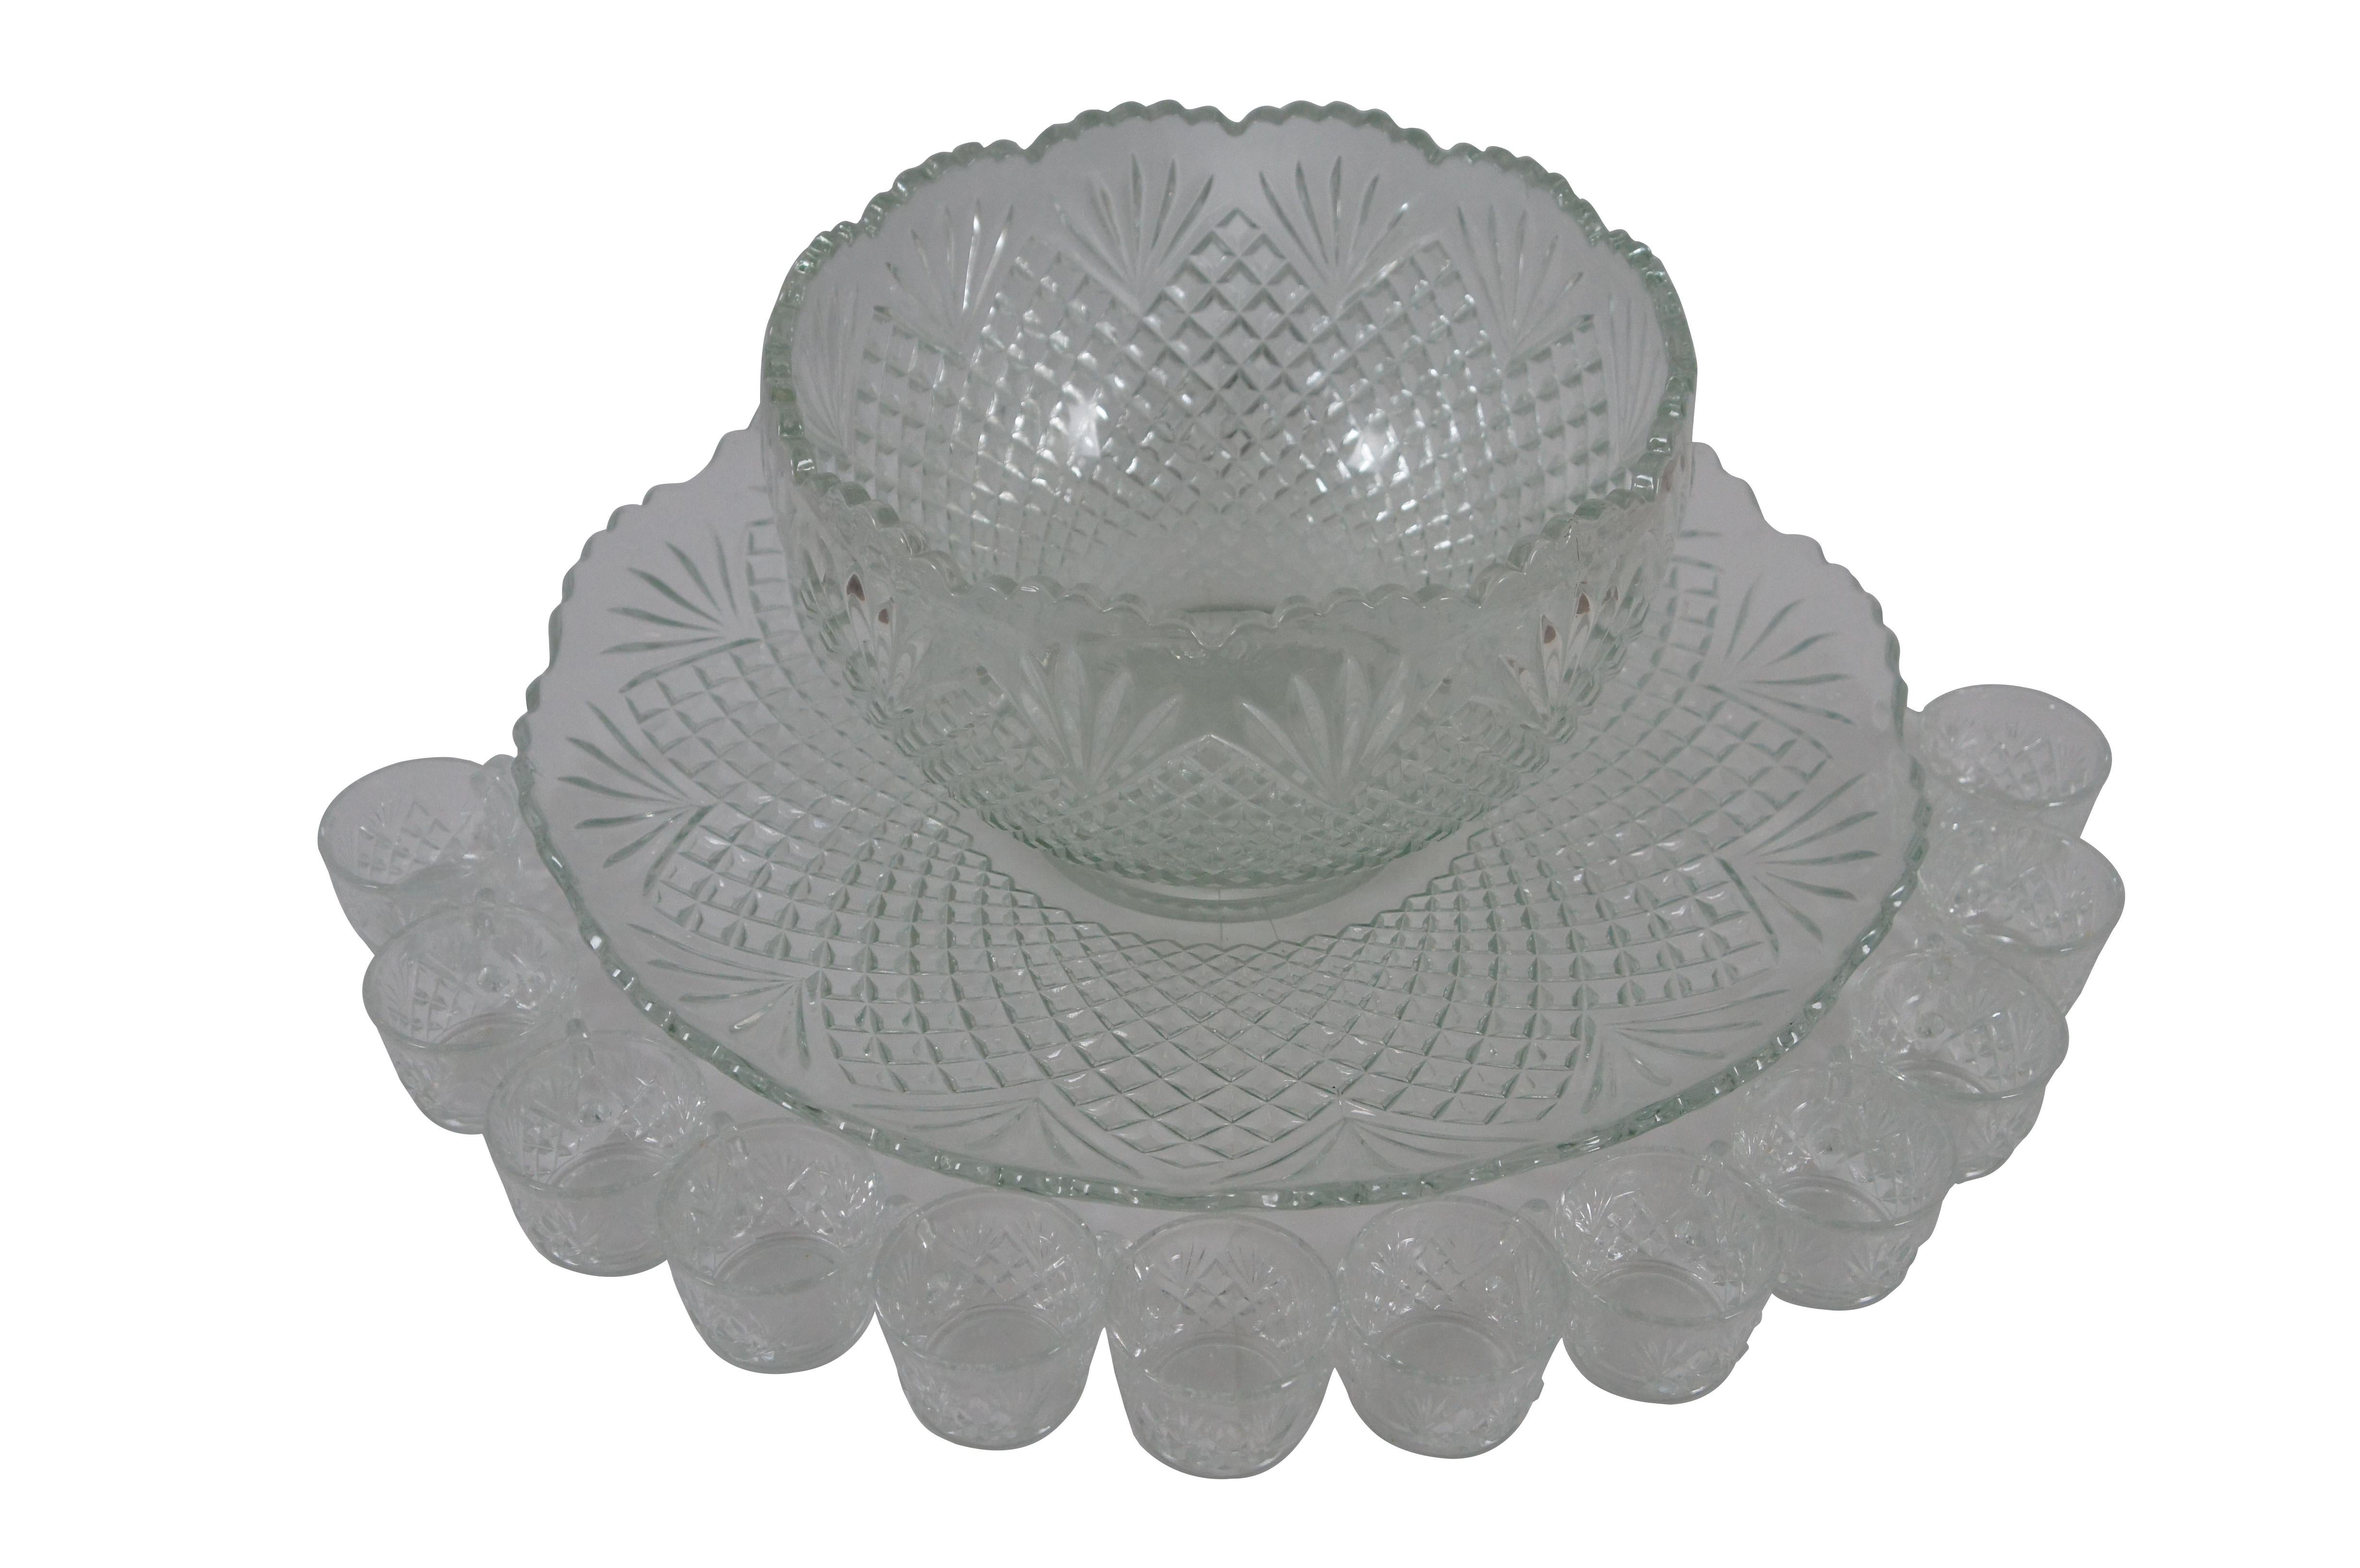 Circa 1940s pressed glass punch set attributed to L.E. Smith Glass Company in the Pineapple pattern. Includes bowl, underplate, and 12 cups. 

